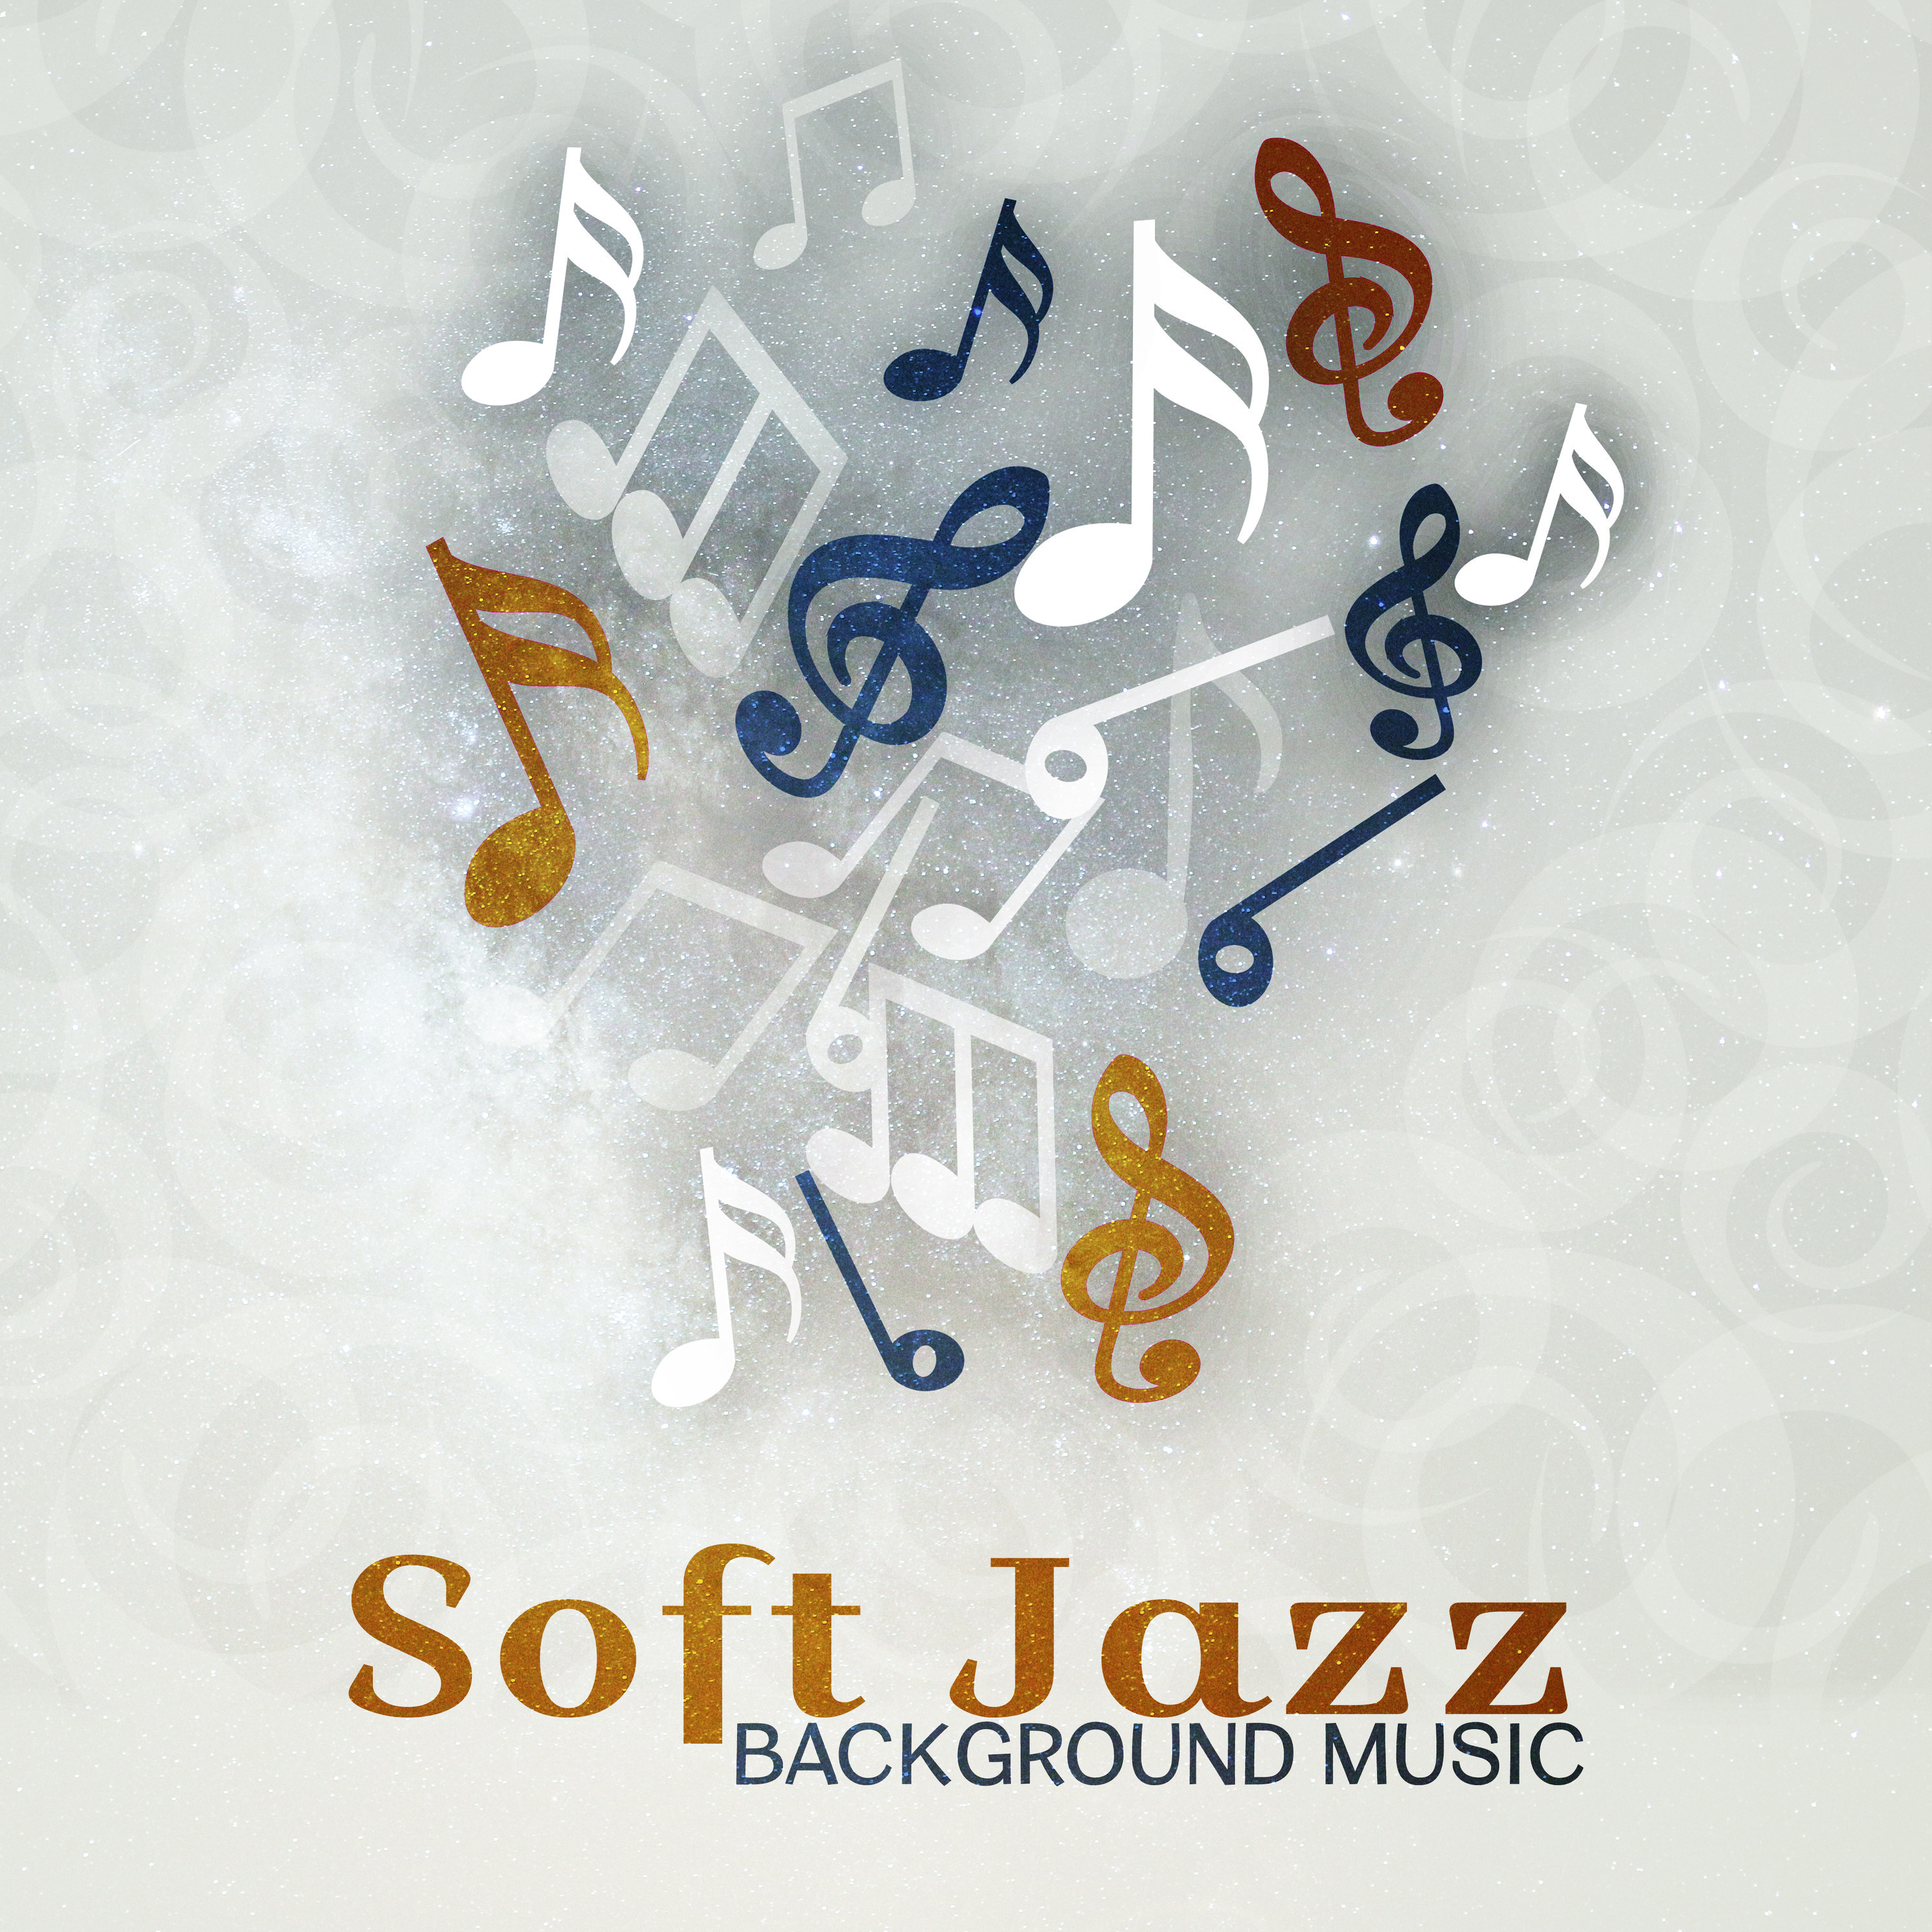 Soft Jazz Background Music – Soft Sounds to Relax, Easy Listening, Peaceful Music, Melodies to Rest